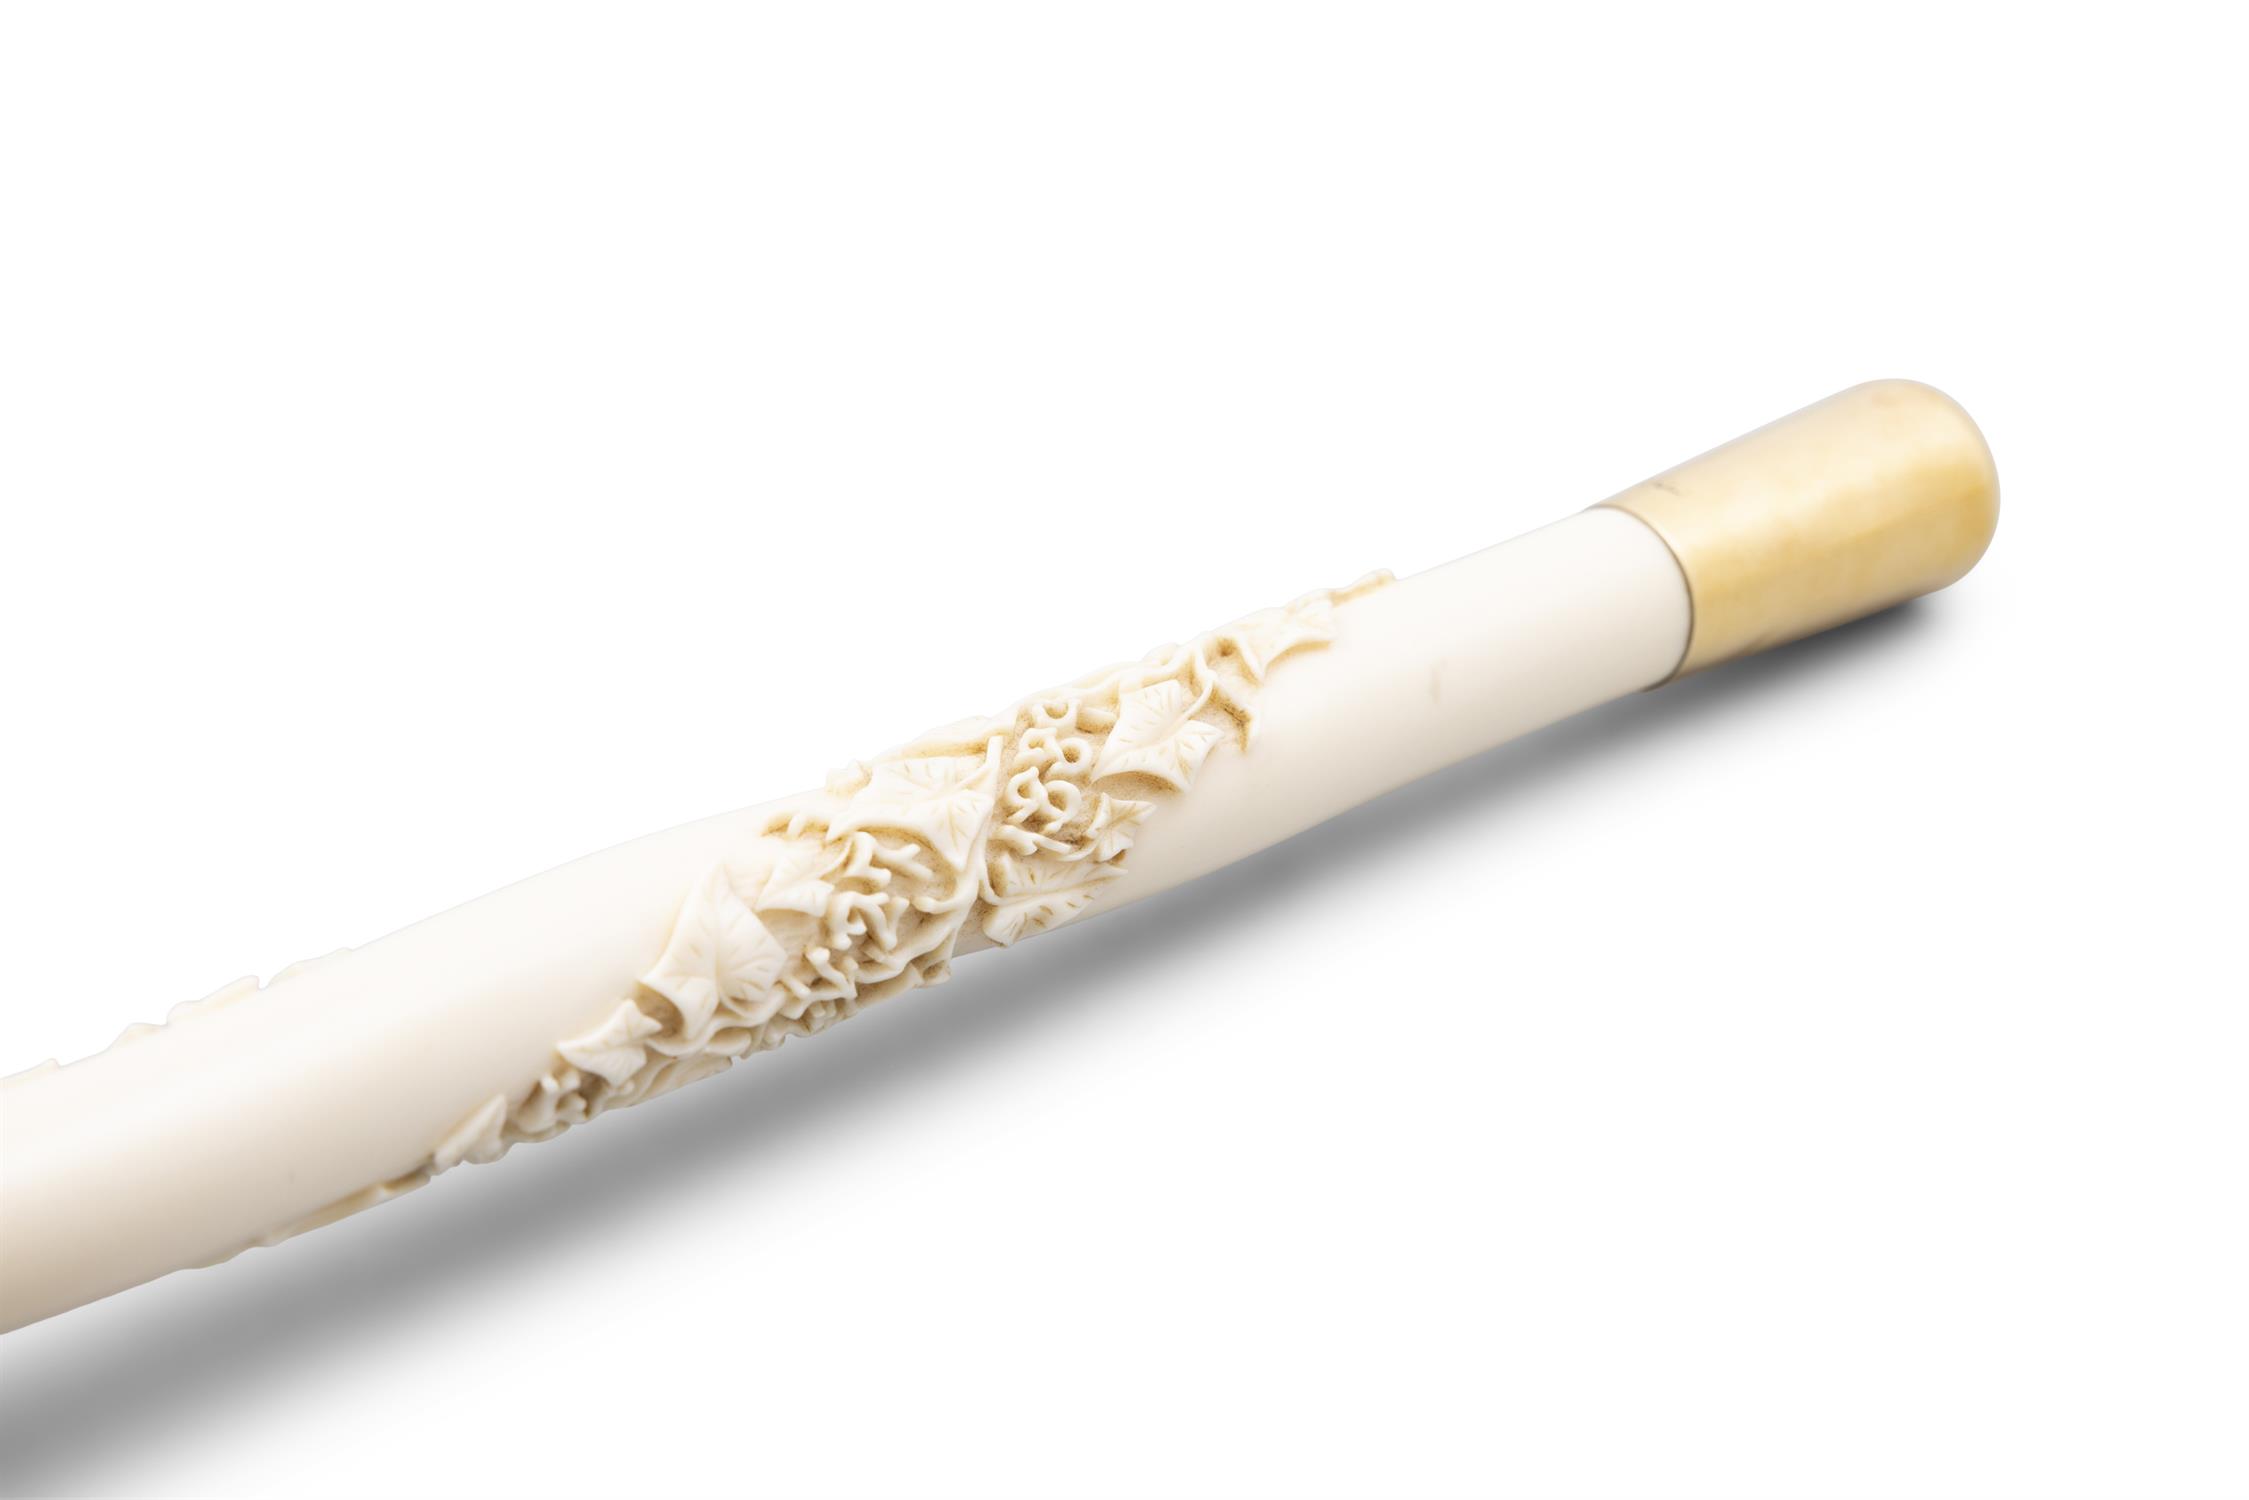 *A VICTORIAN UMBRELLA WITH IVORY CARVED HANDLE, the handle carved with vine leaves and - Image 2 of 10